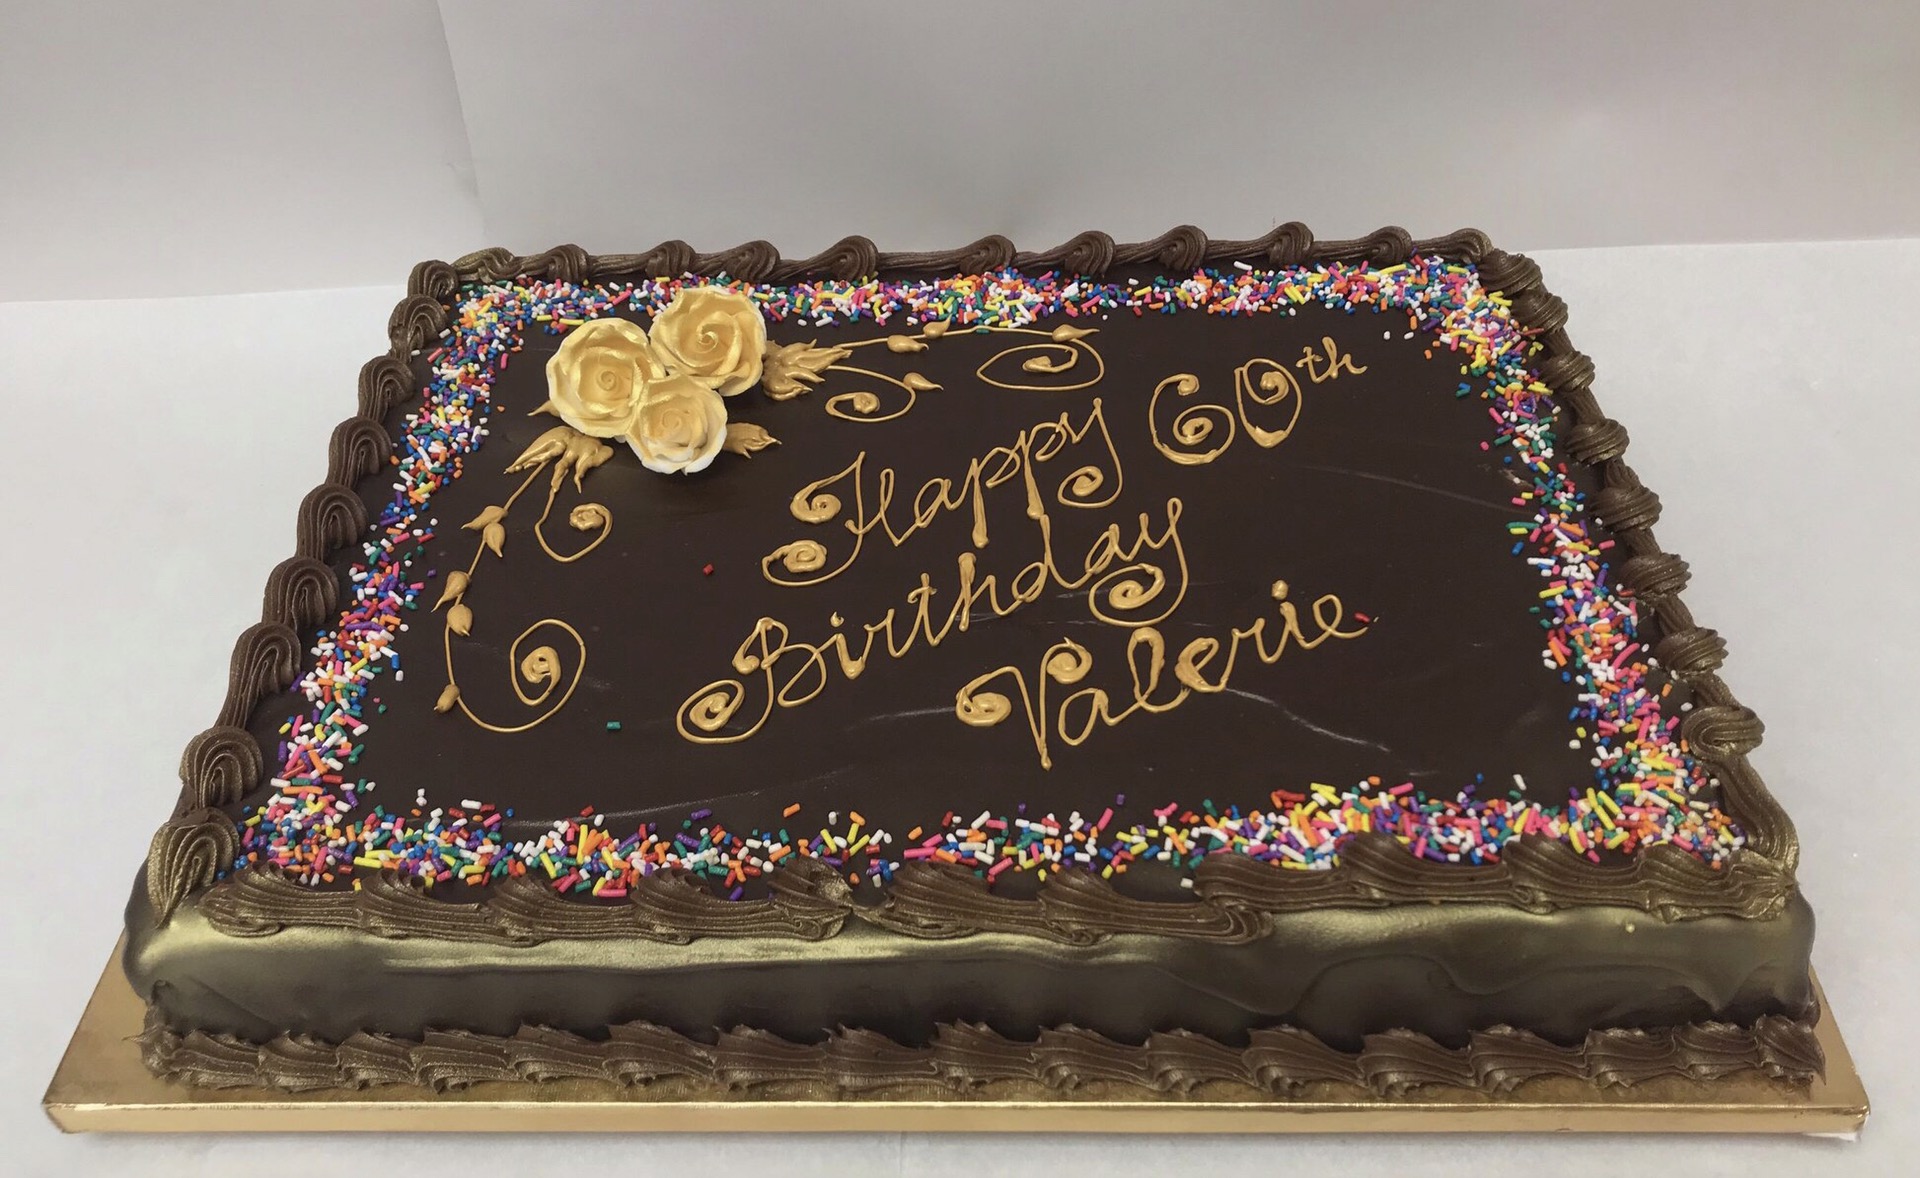 Happy 60th Birthday Paris...We hope it was a Sweet one! #celebration #sheet  #cakes #cakestylist #philly #only #attheecakesalon | Instagram